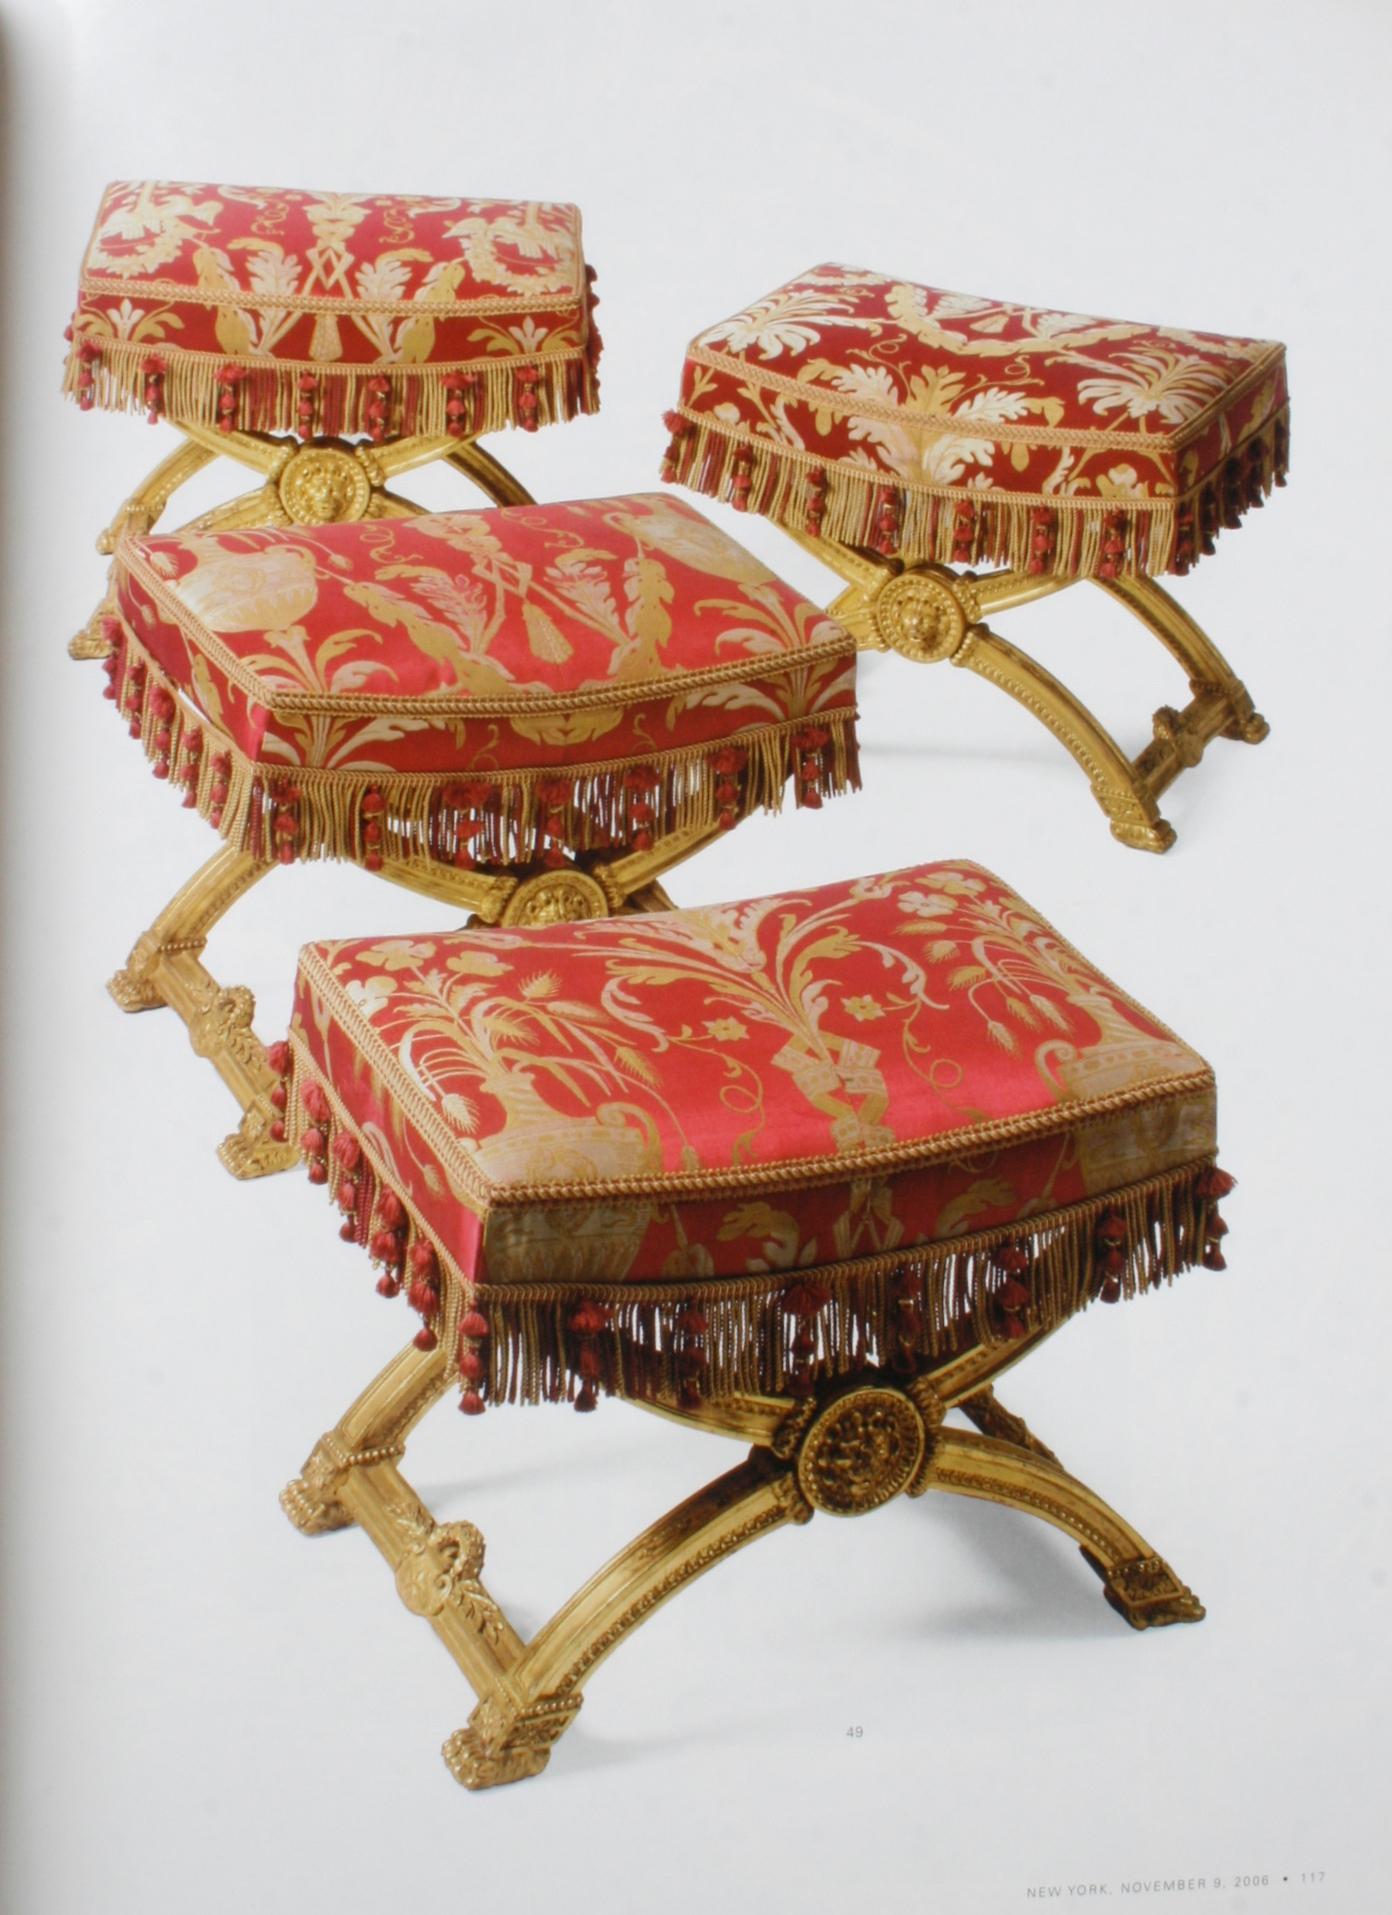 Paper Sotheby's, Important French Furniture from the Collection of Dr. Benchoufi